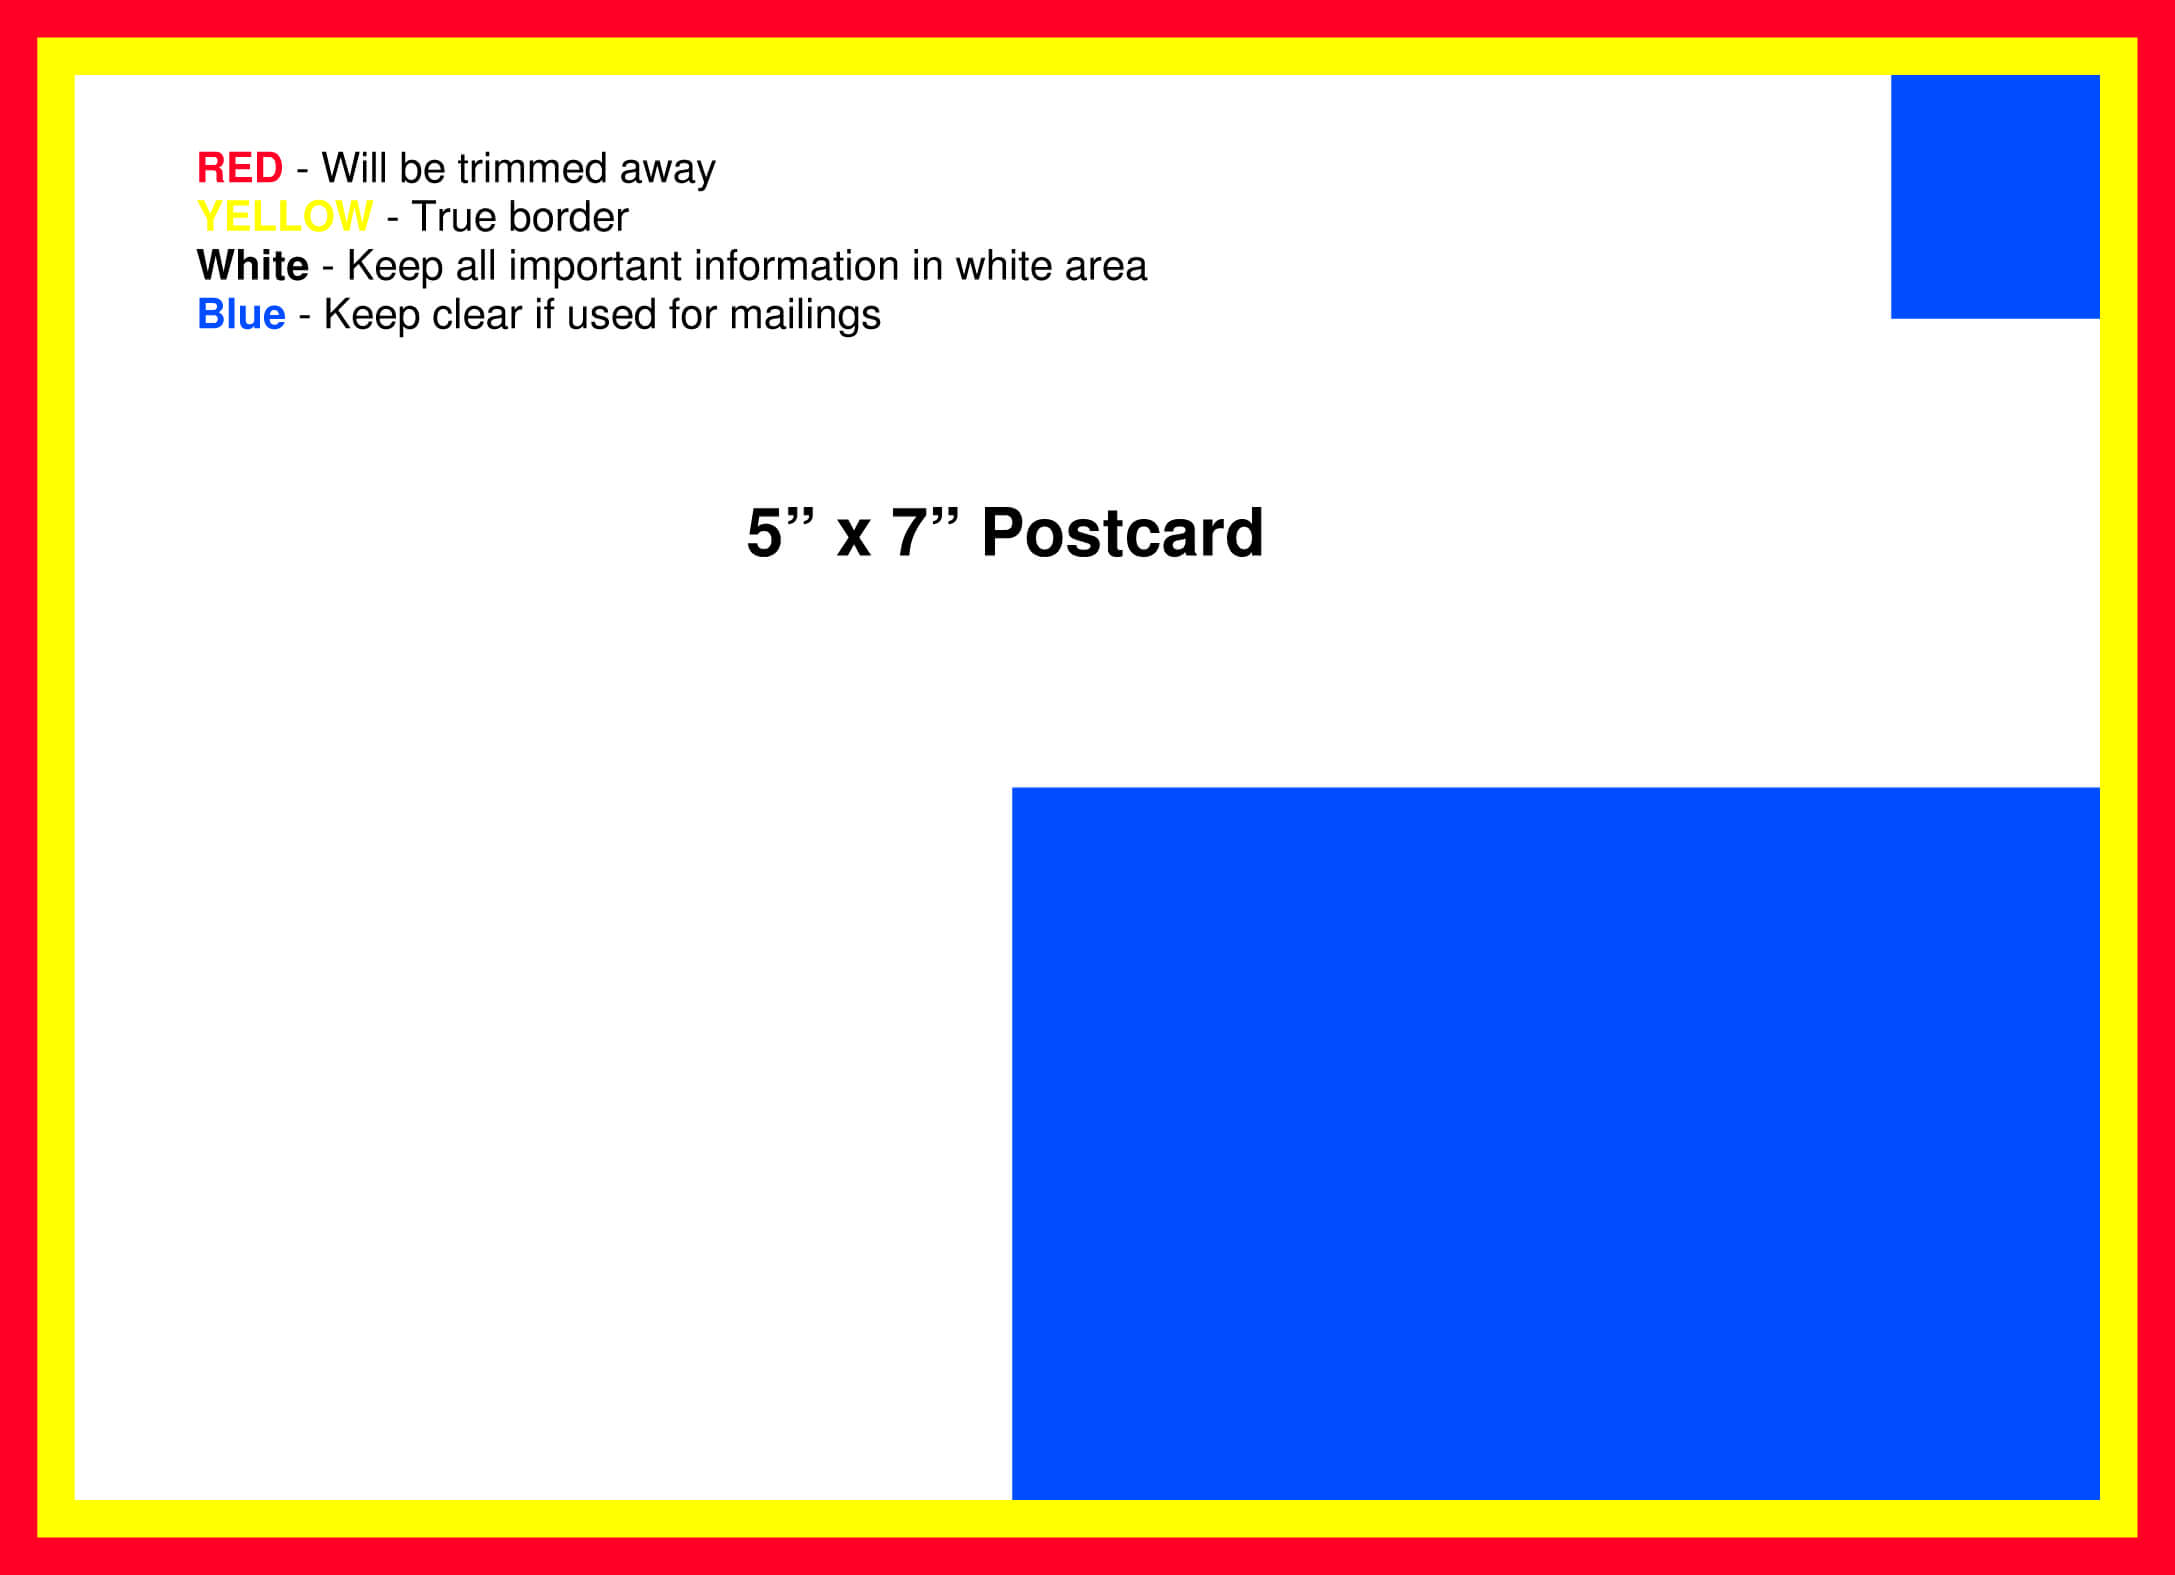 Usps Postcard Size Template | Sample Resume Service With 5 X 7 Postcard Template